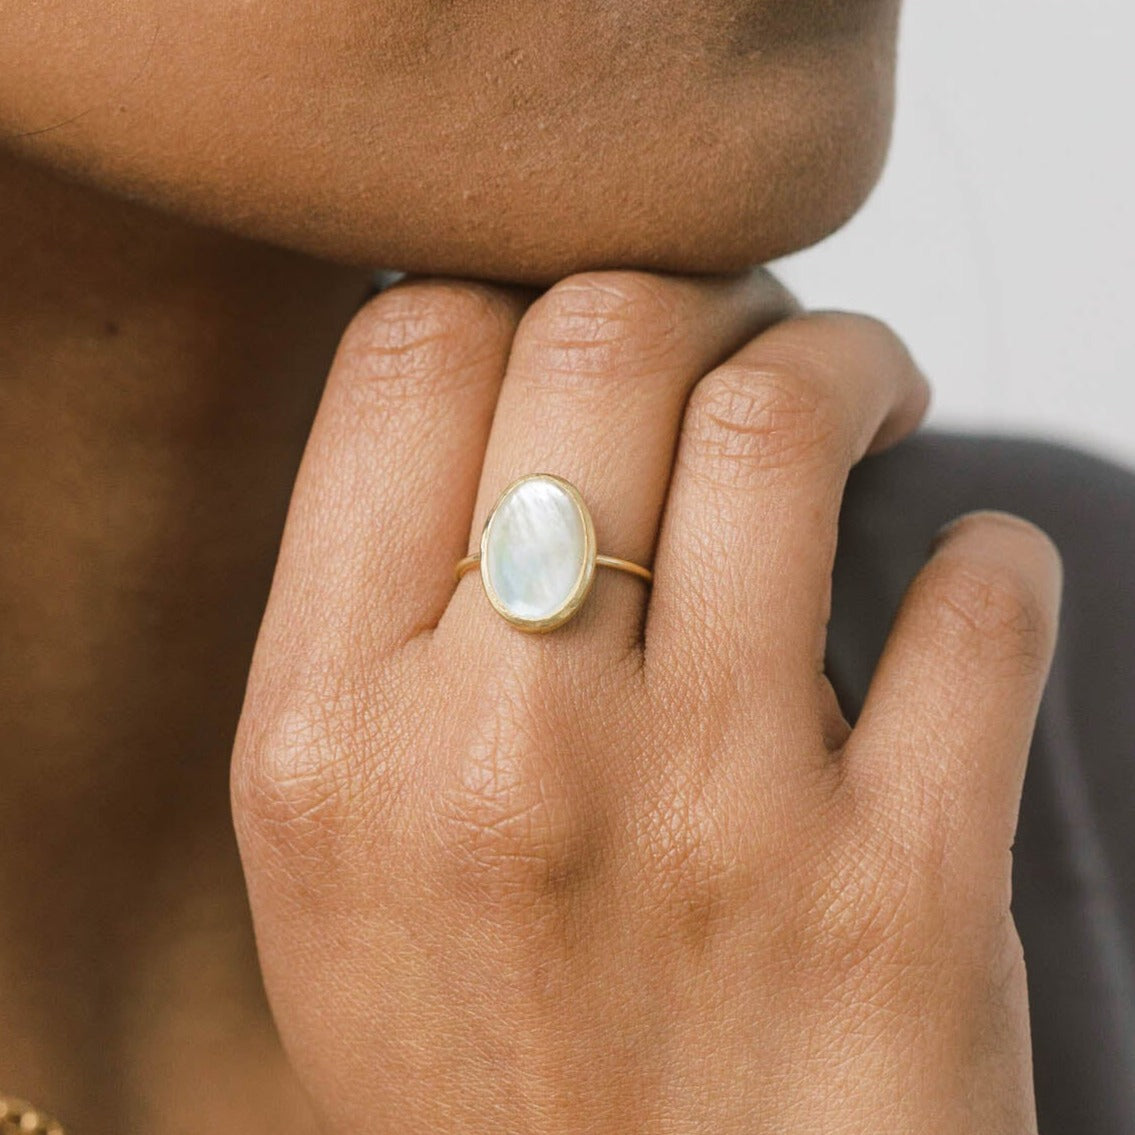 Oval pearl cabochon is set on a gold band. The ring style is minimal modern and timeless.